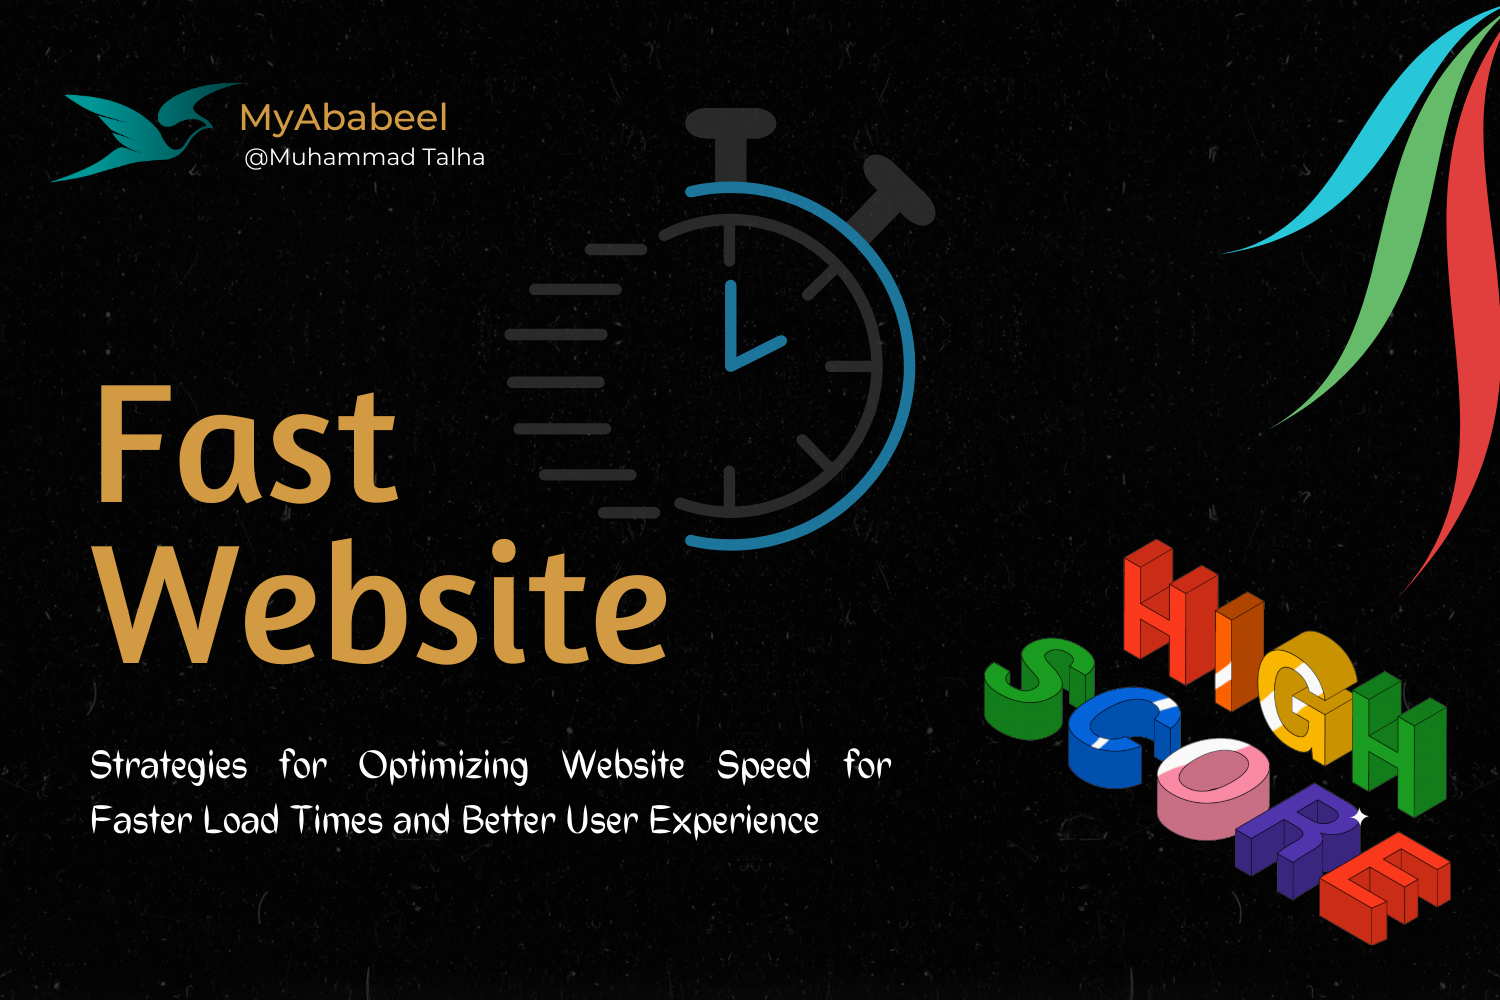 Strategies for Optimizing Website Speed for Faster Load Times and Better User Experience